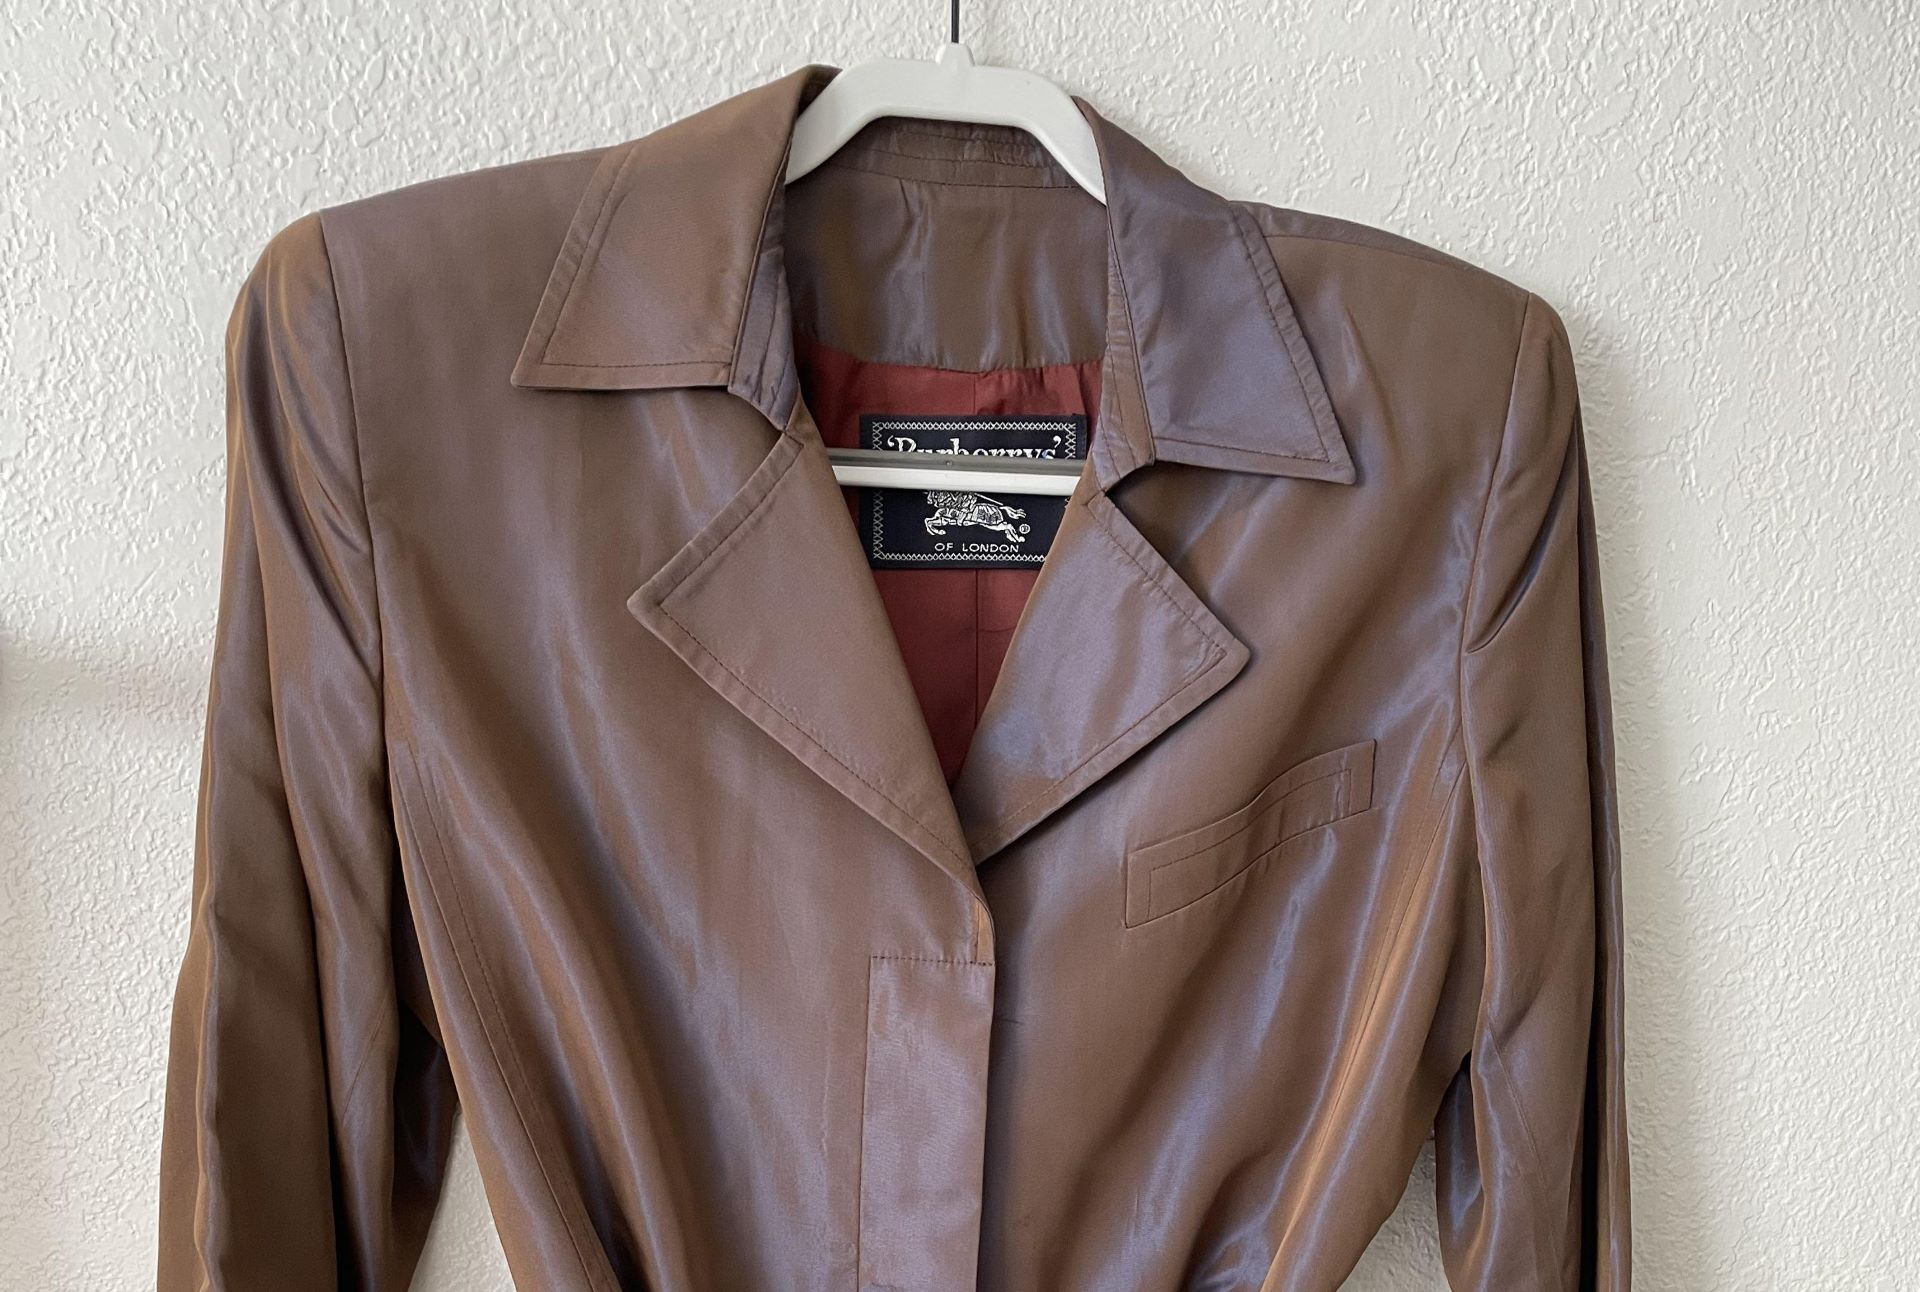 Redditor pays only $20 for silk Burberry jacket at the thrift store